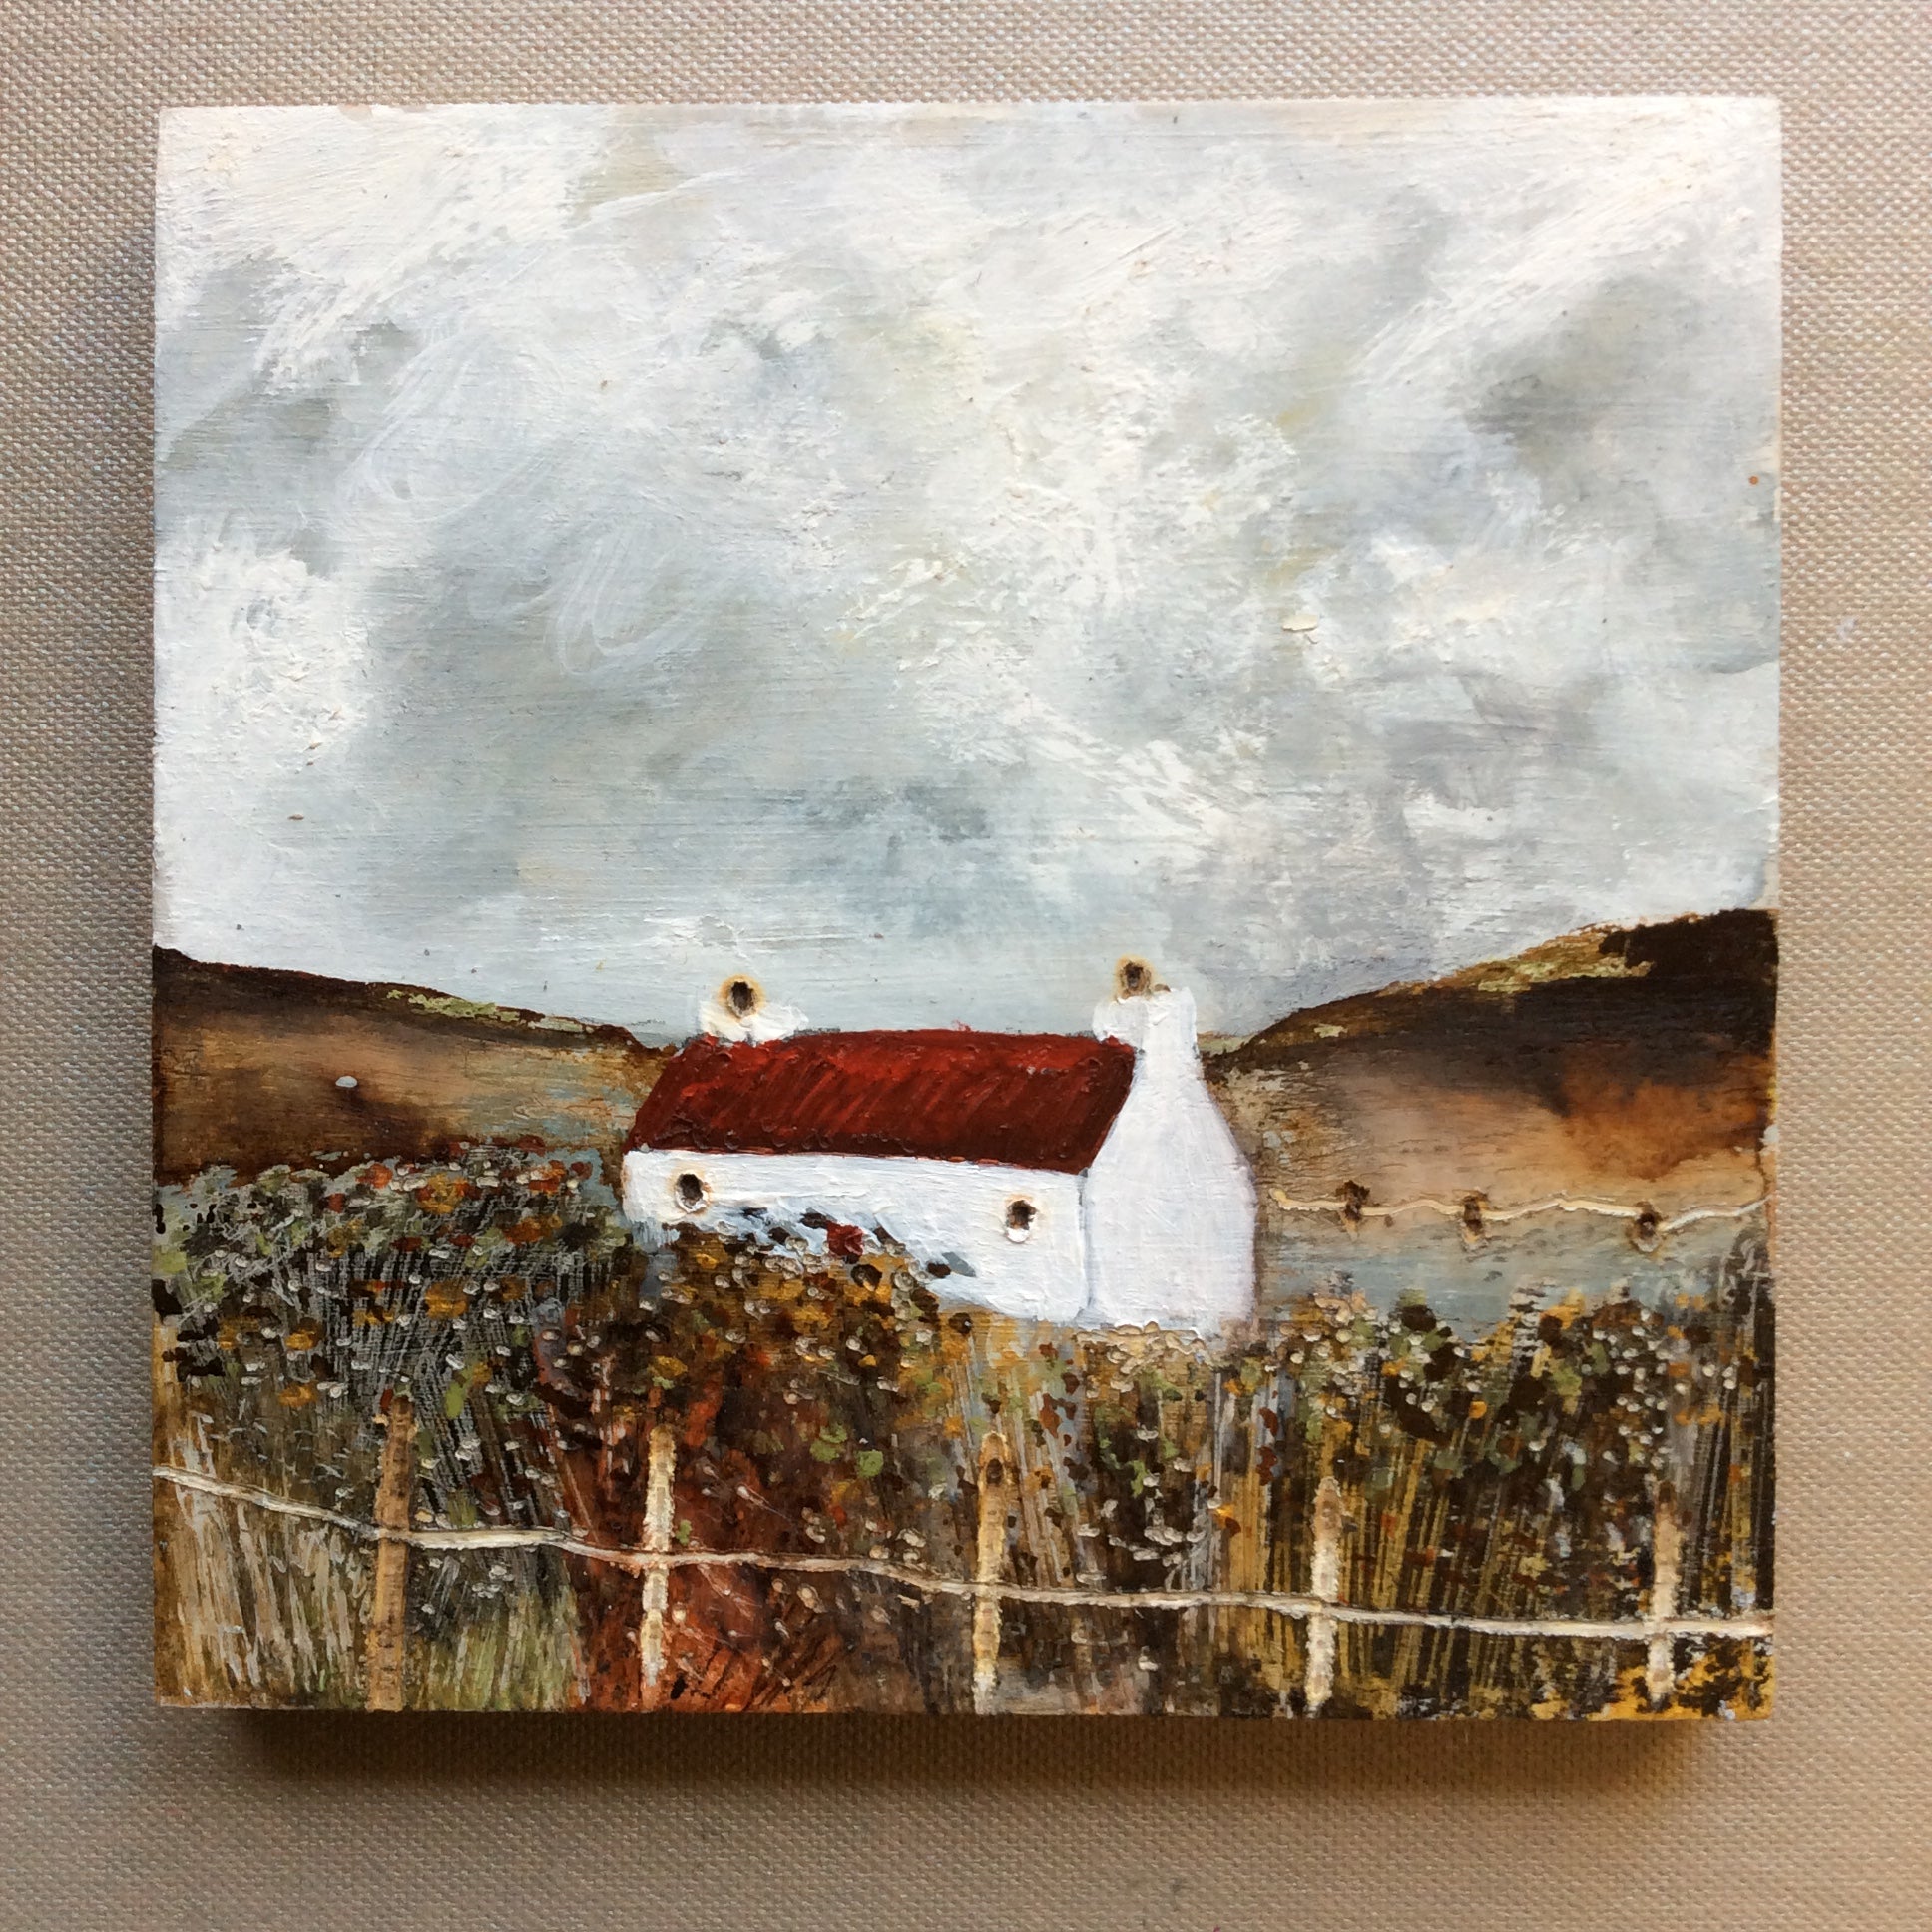 Copy of Mixed Media  art on wood By Louise O’Hara “Red Roof Croft House”